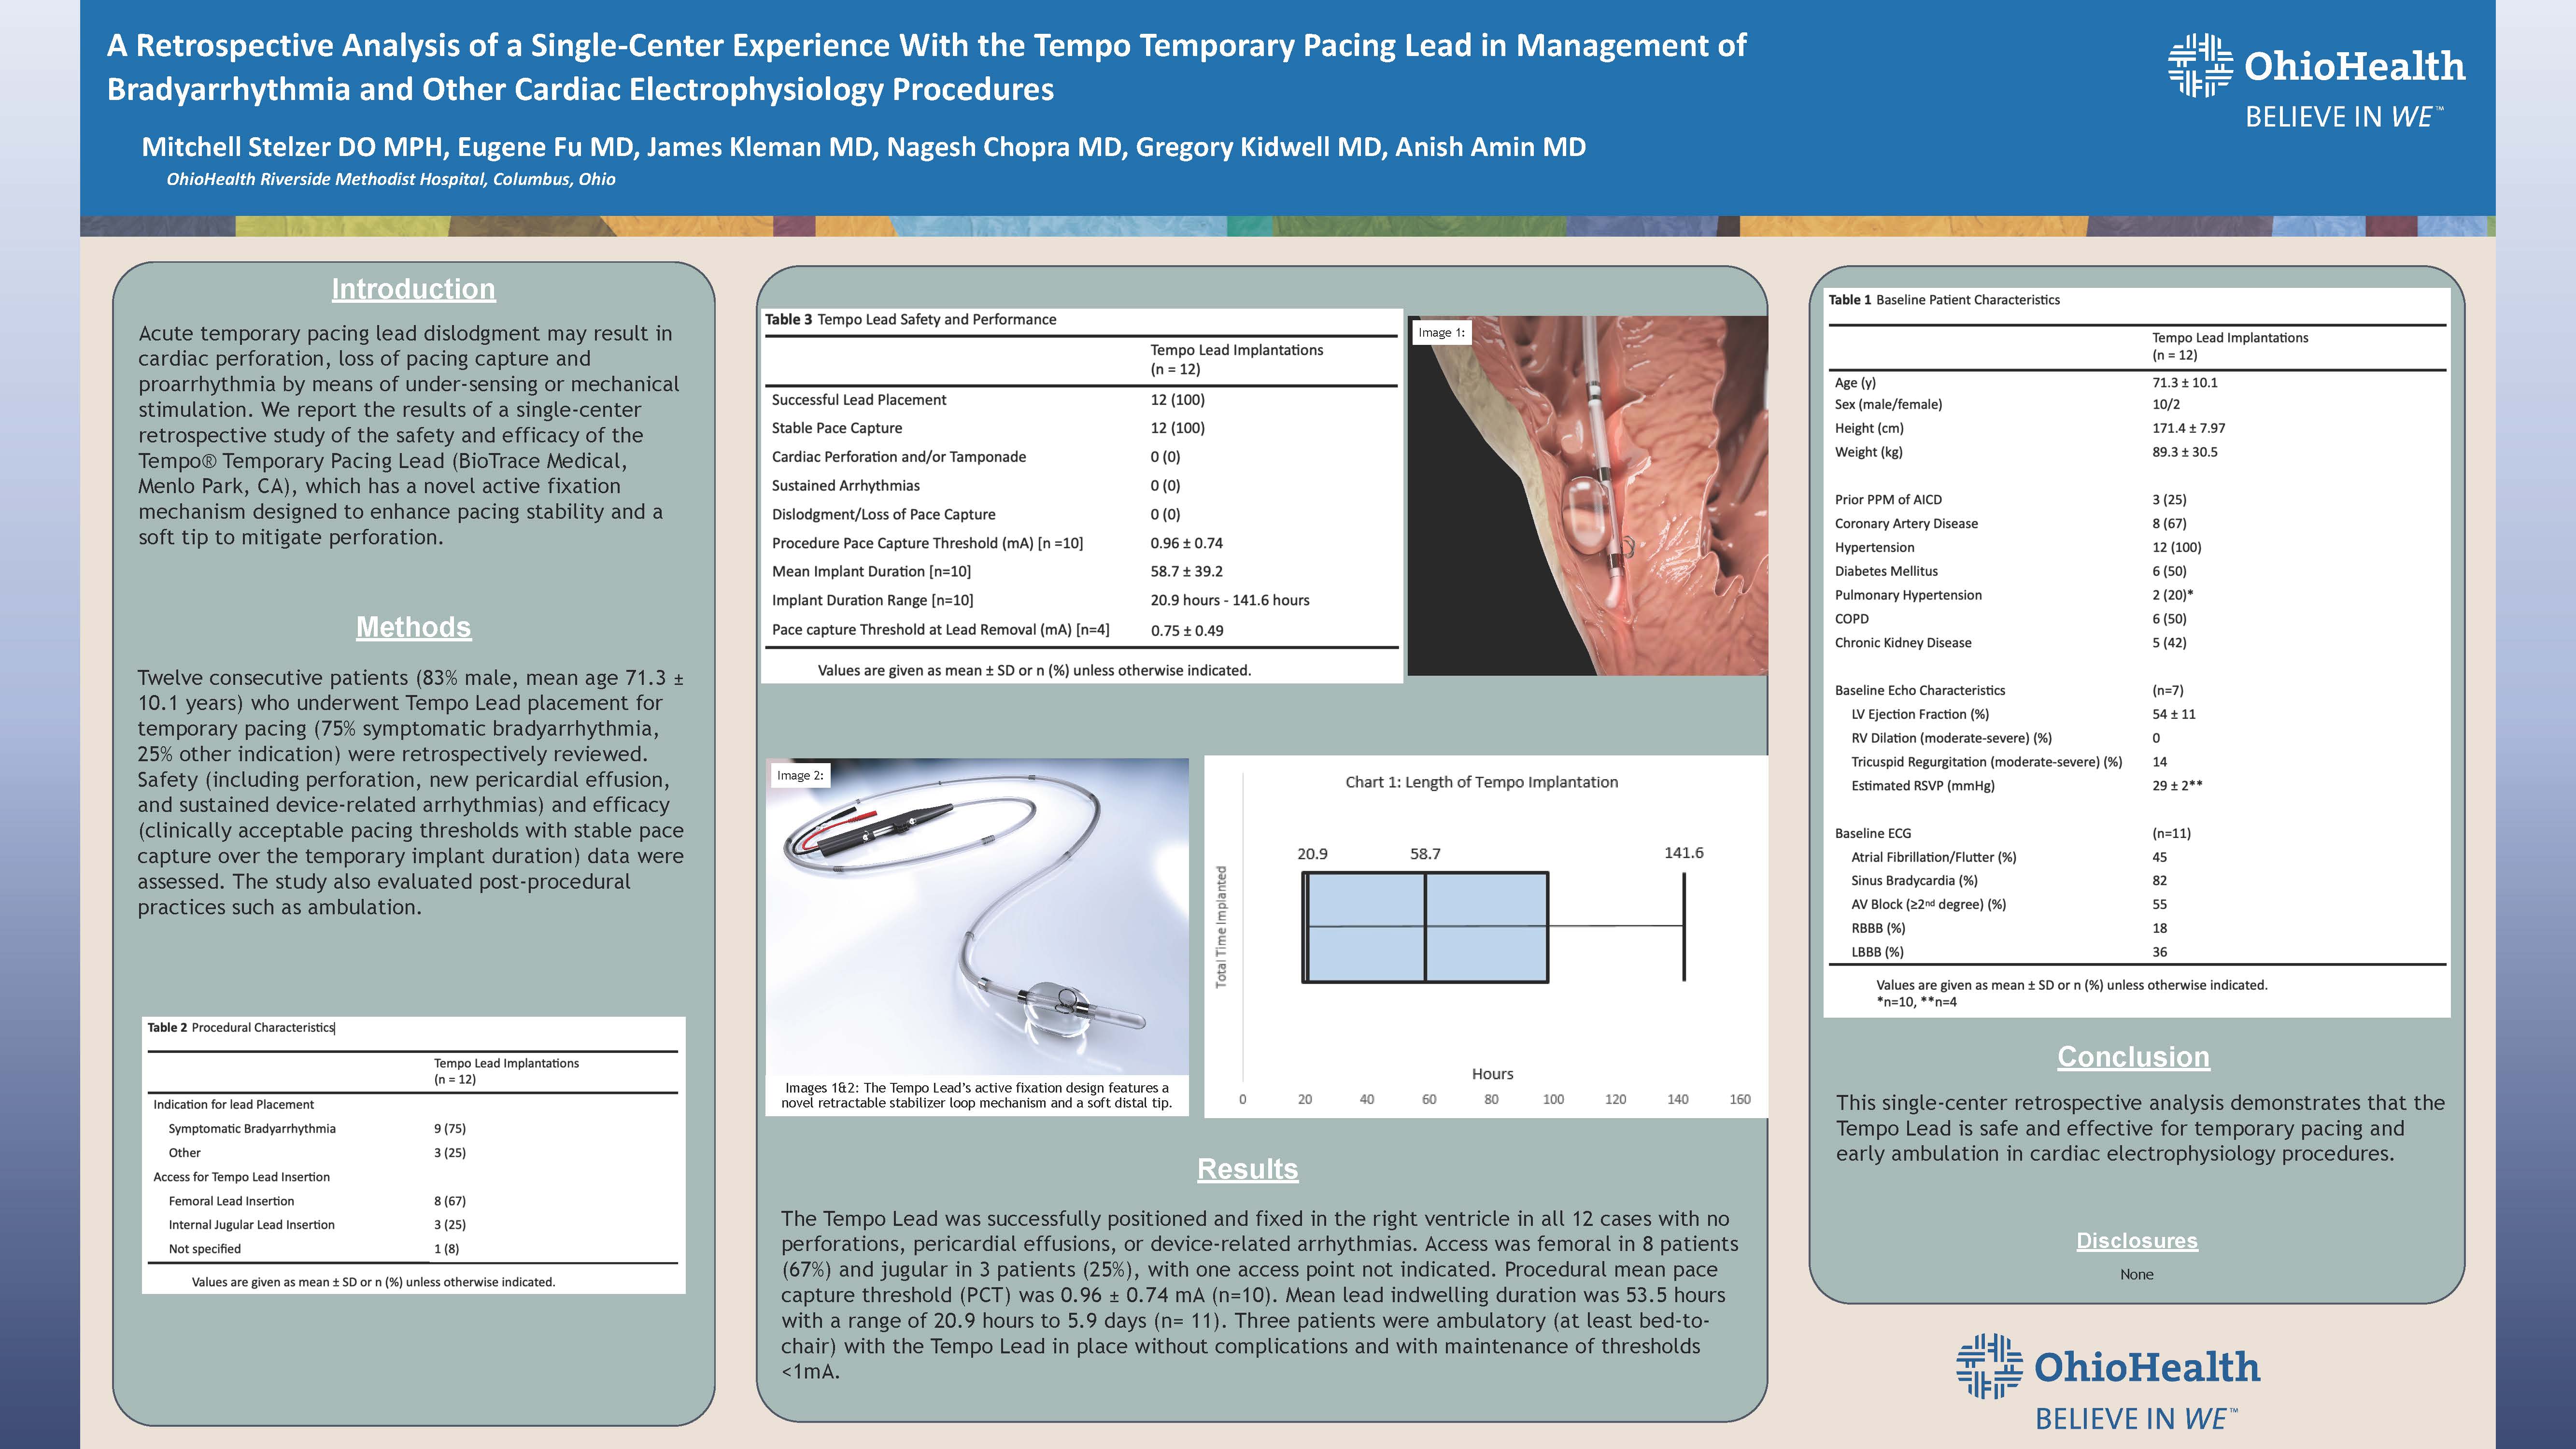 Poster image P1039 - A Retrospective Analysis of a Single-Center Experience With the Tempo Temporary Pacing Lead in Management of Bradyarrhythmia and Other EP Procedures